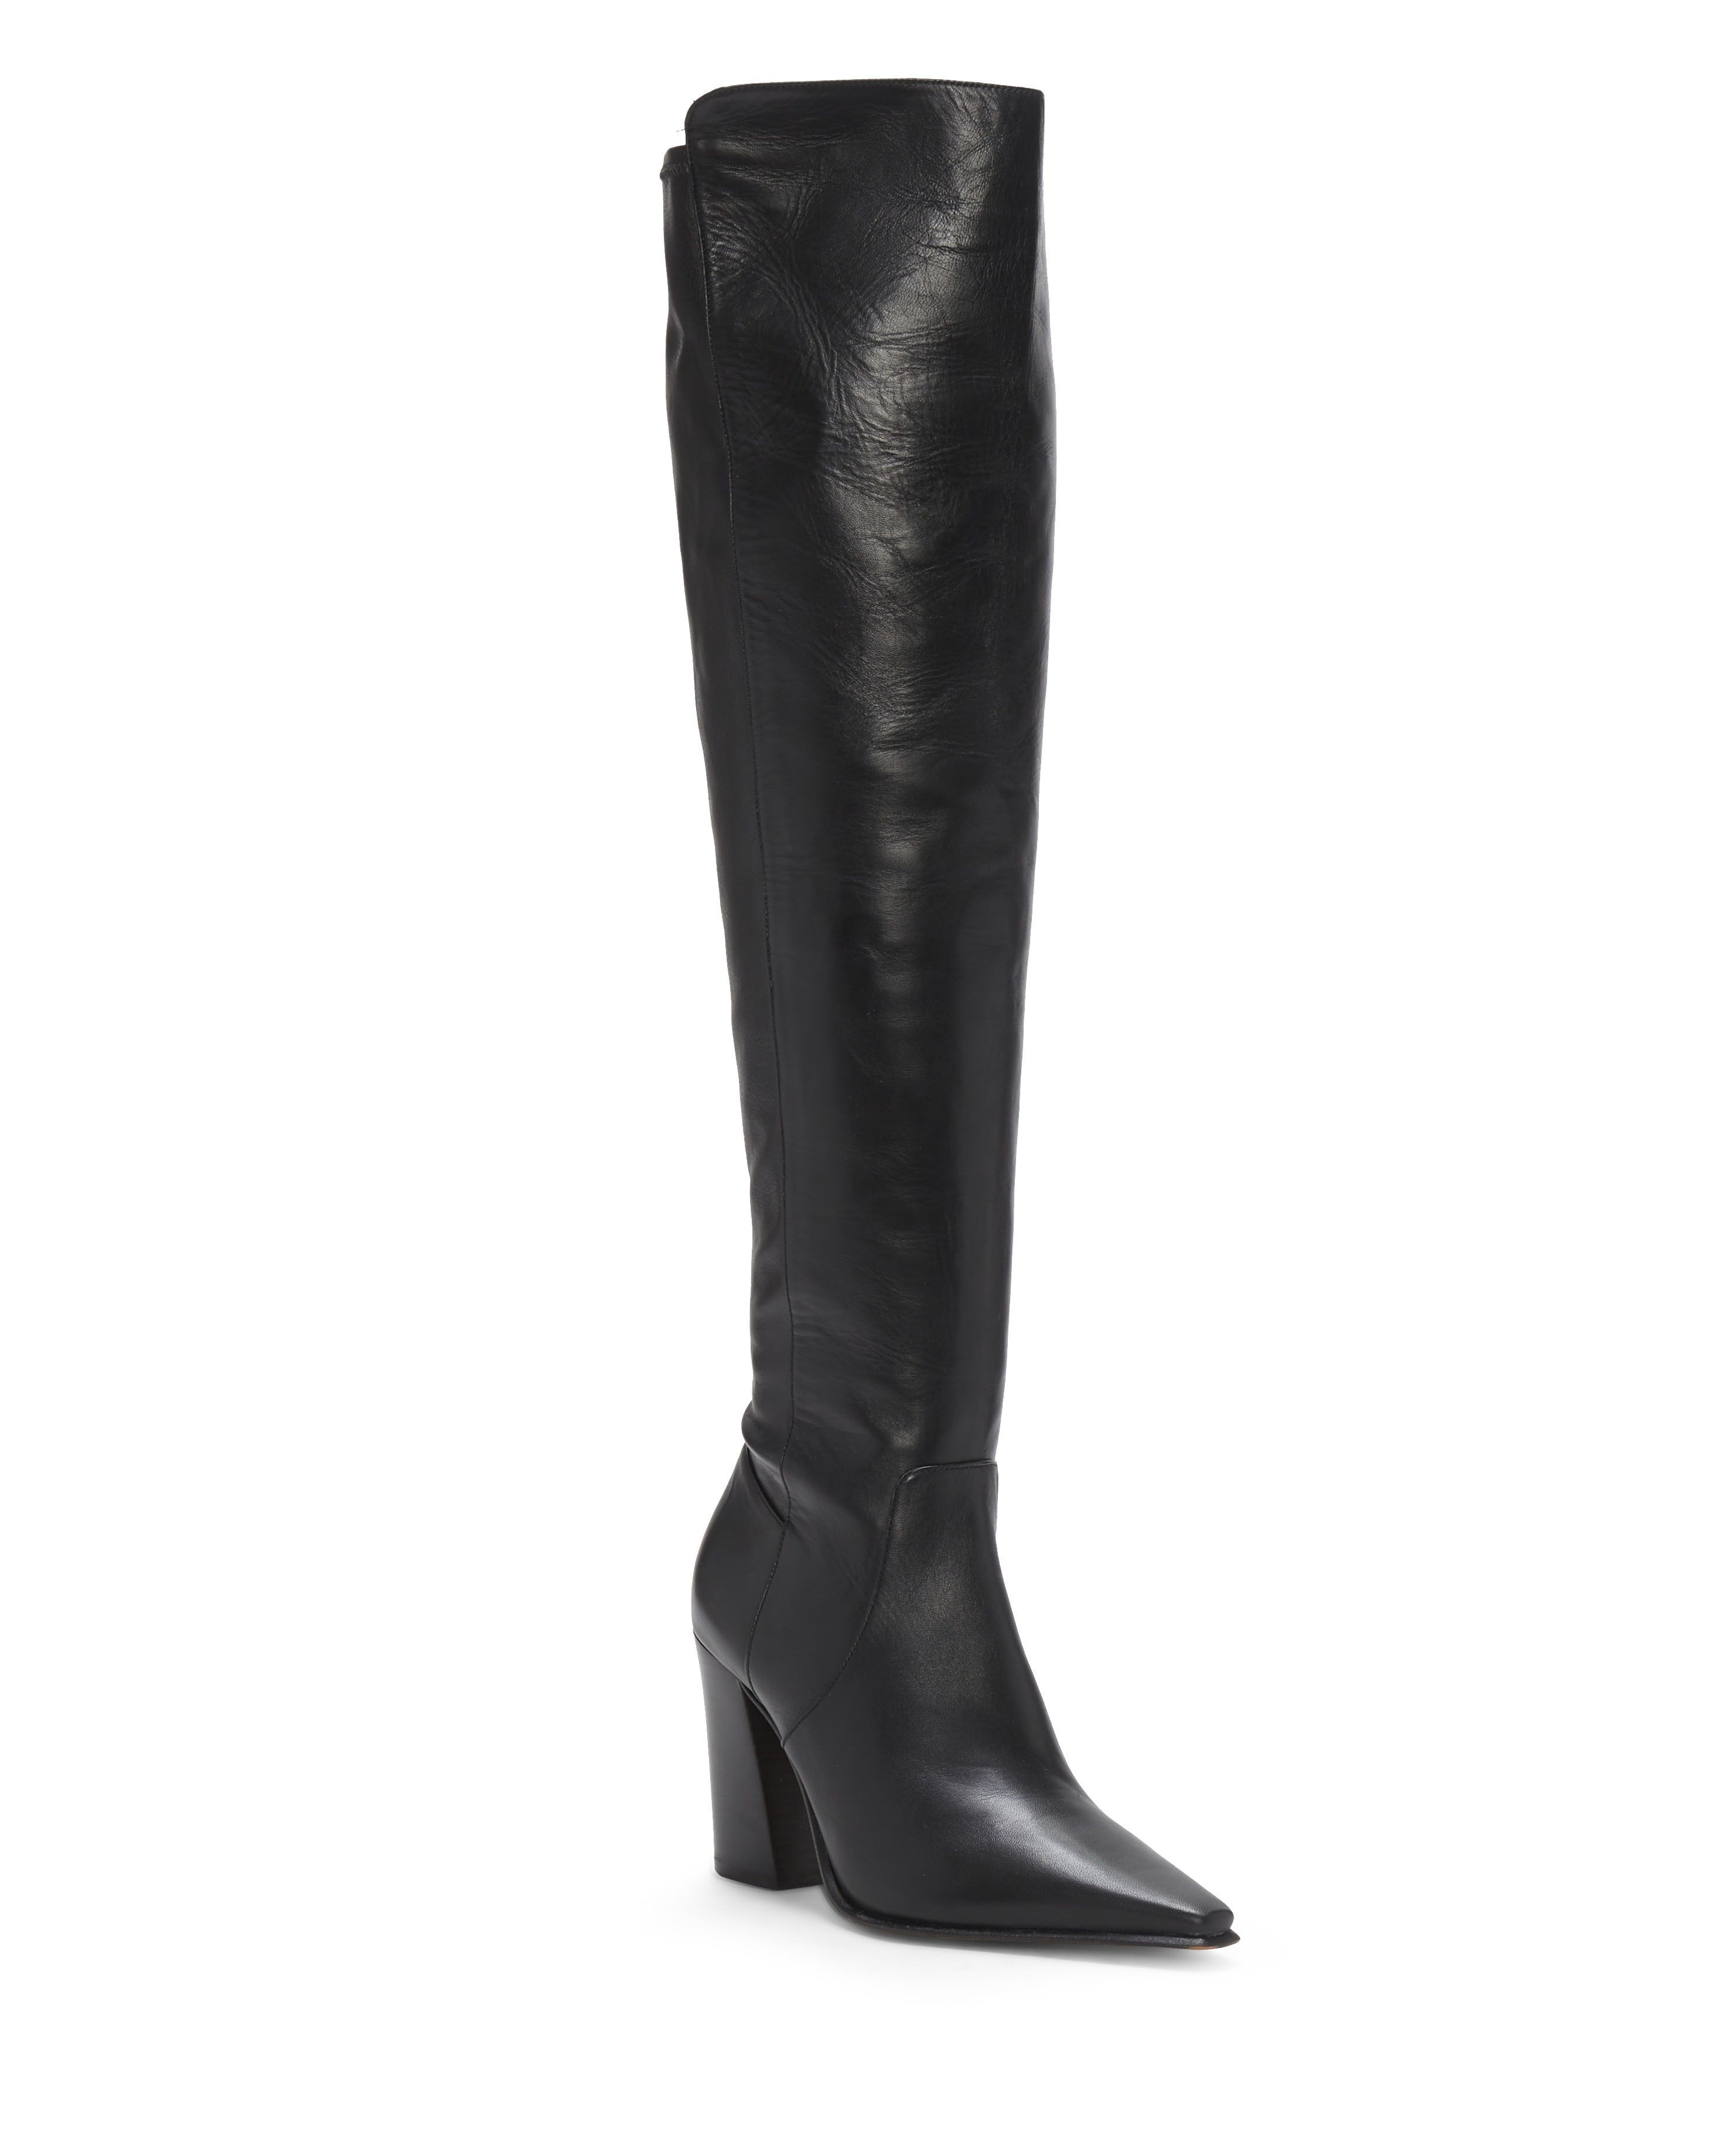 Demerri Over-The-Knee Boot - EXCLUDED FROM PROMOTION | Vince Camuto